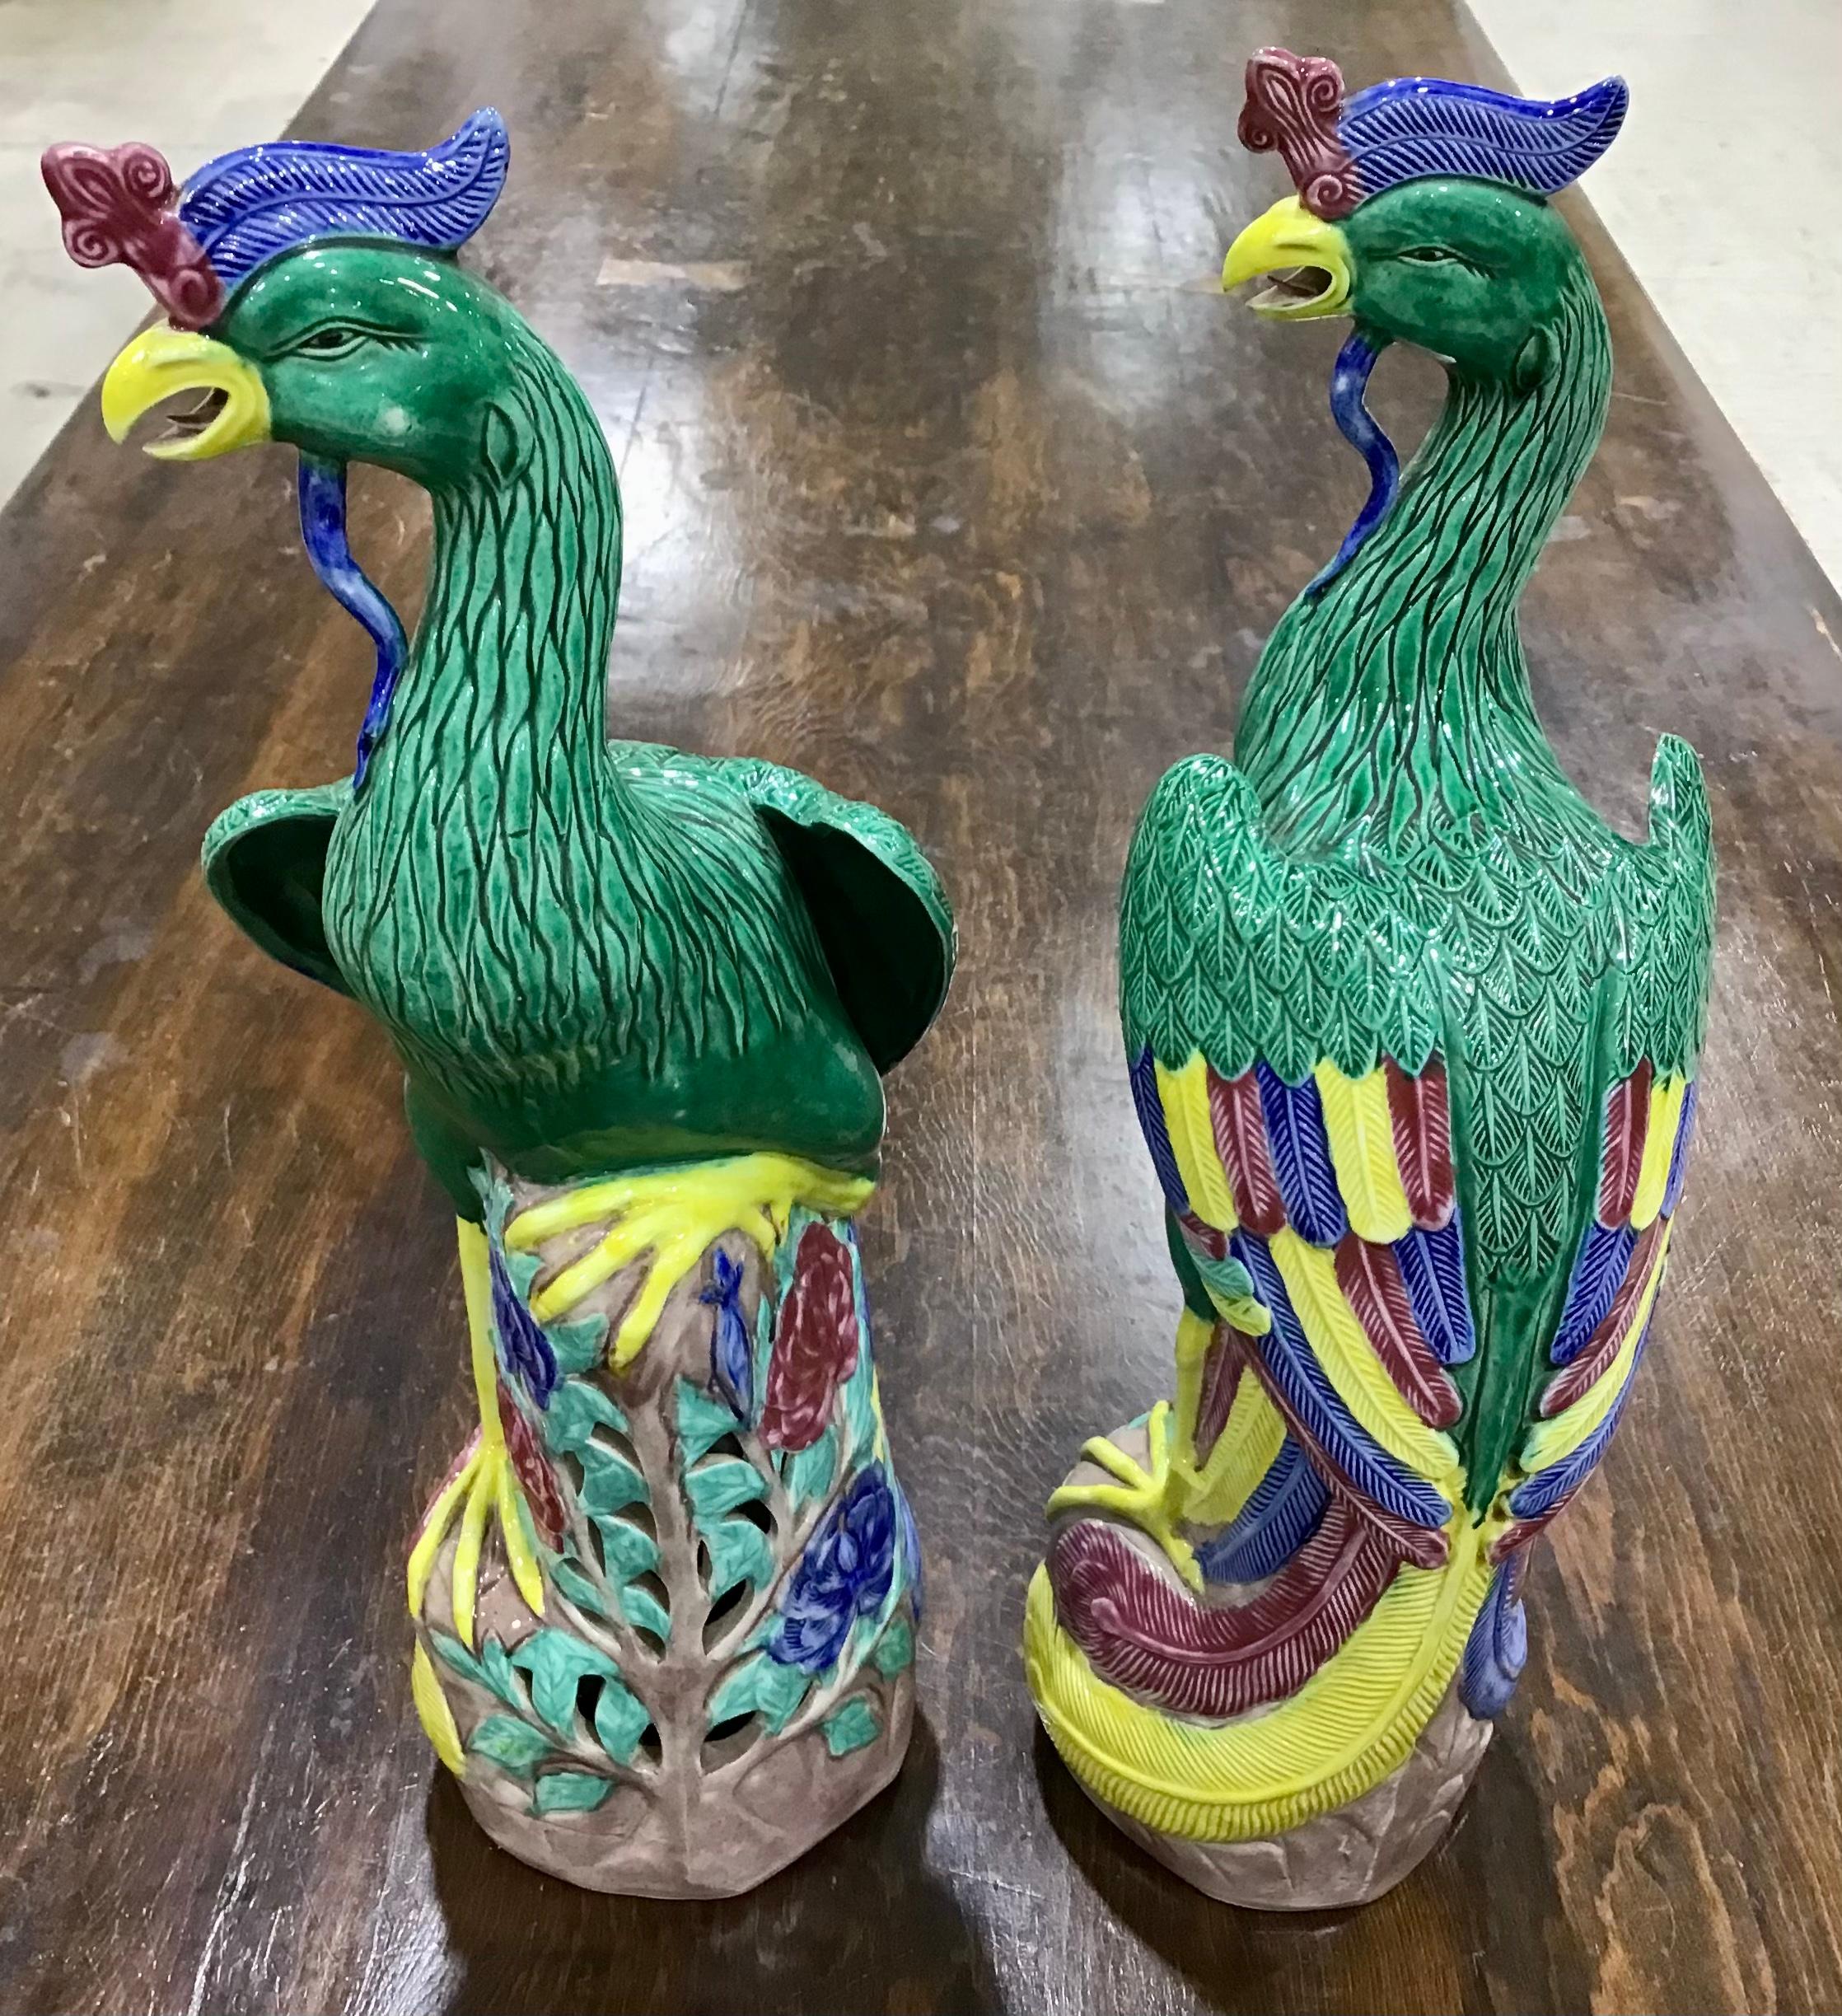 A wonderful pair of porcelain Chinese export models of roosters. A mirror-image pair of finely modeled porcelain roosters in polychrome glaze; each with great detail seen in their heads, eyes, combs and wattles; their finely-painted feathers in a